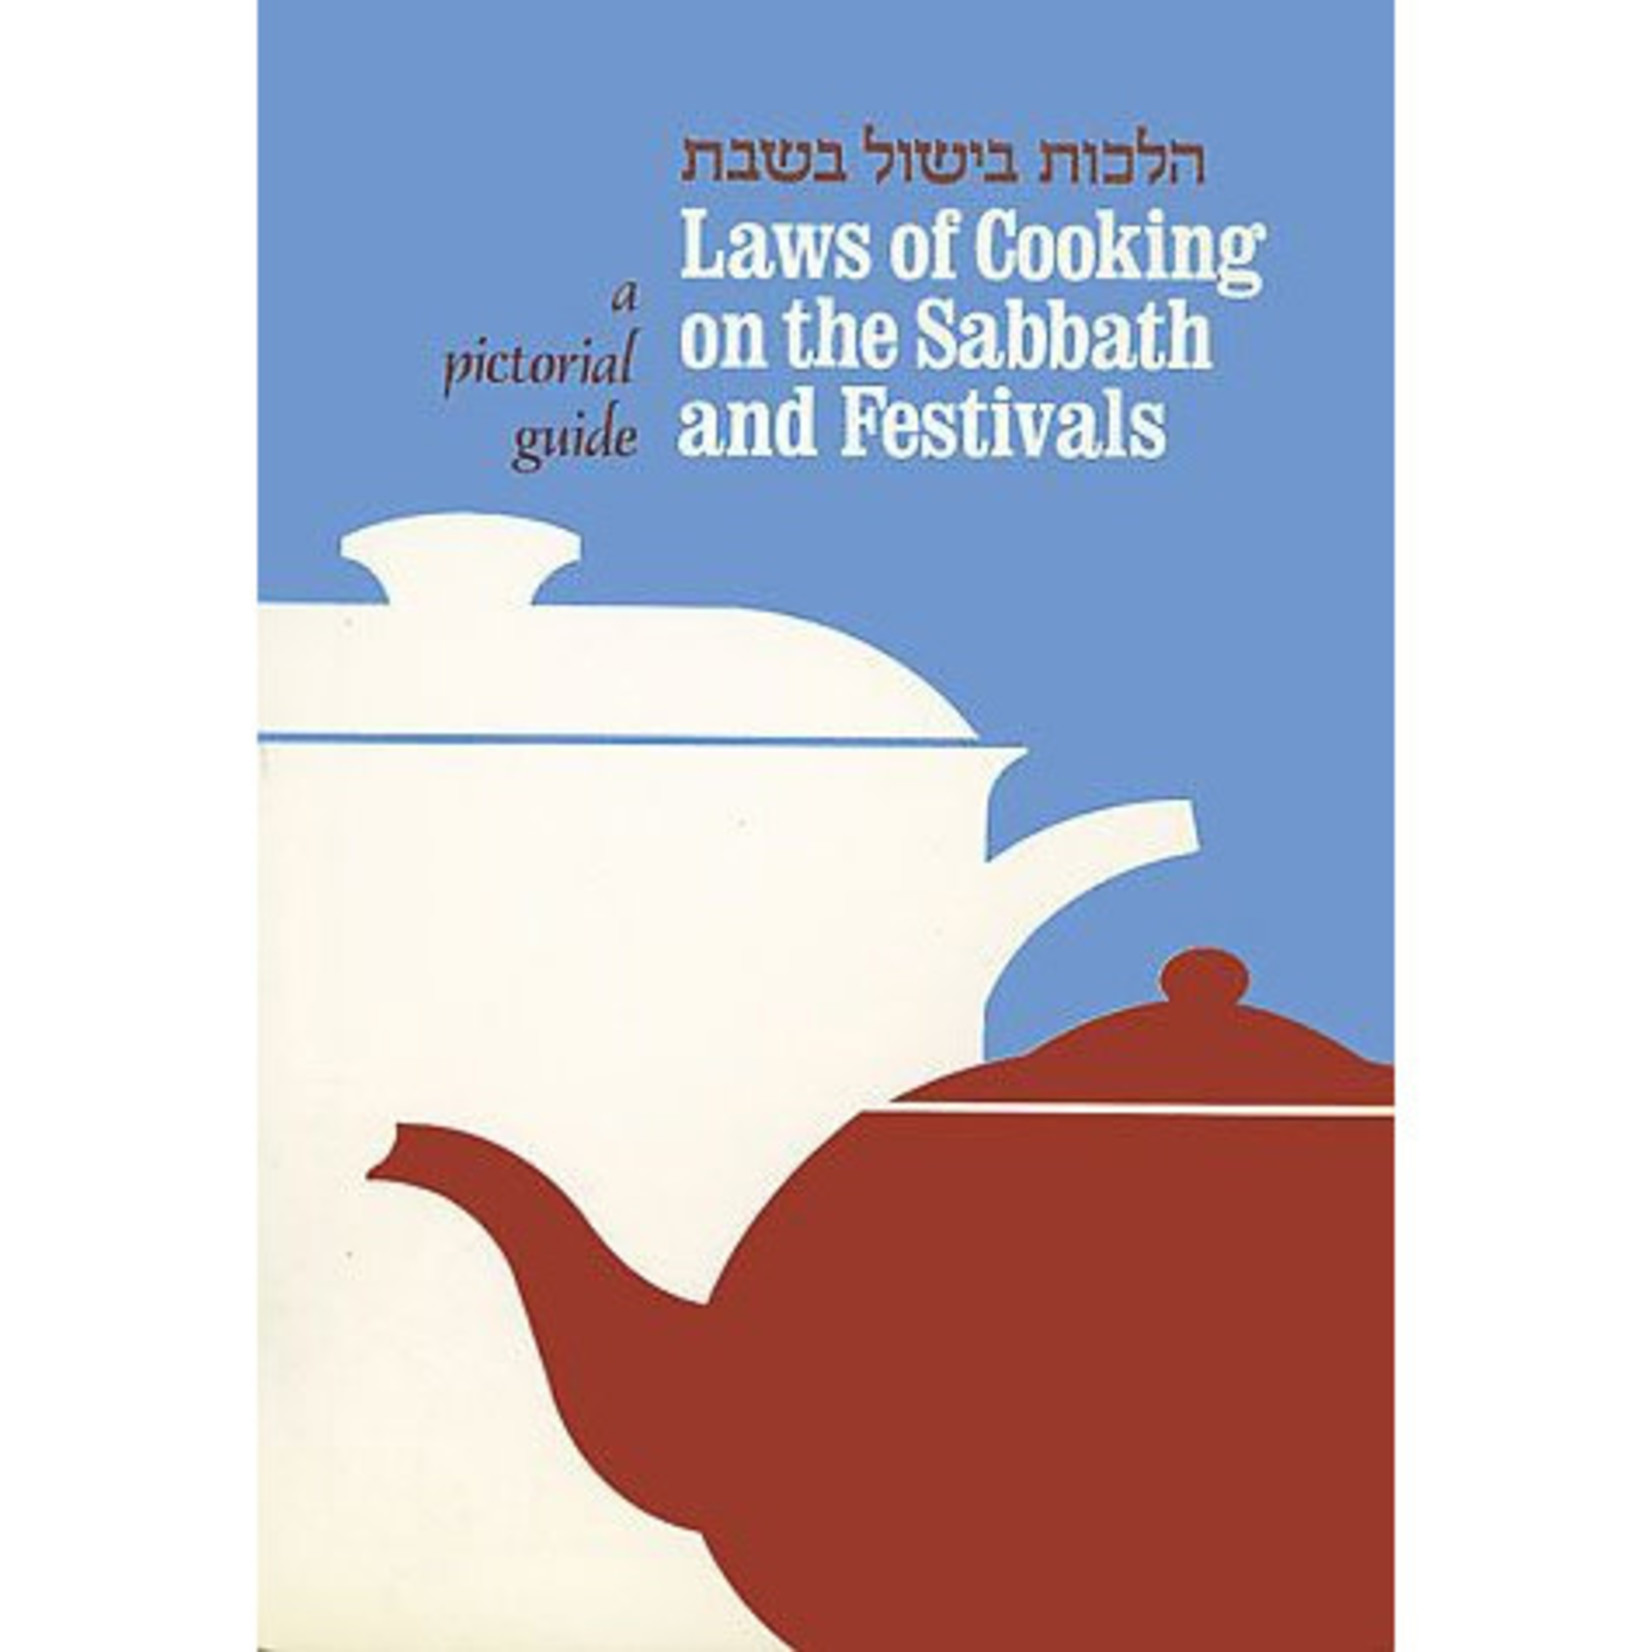 Laws of Cooking on Sabbath & Festivals